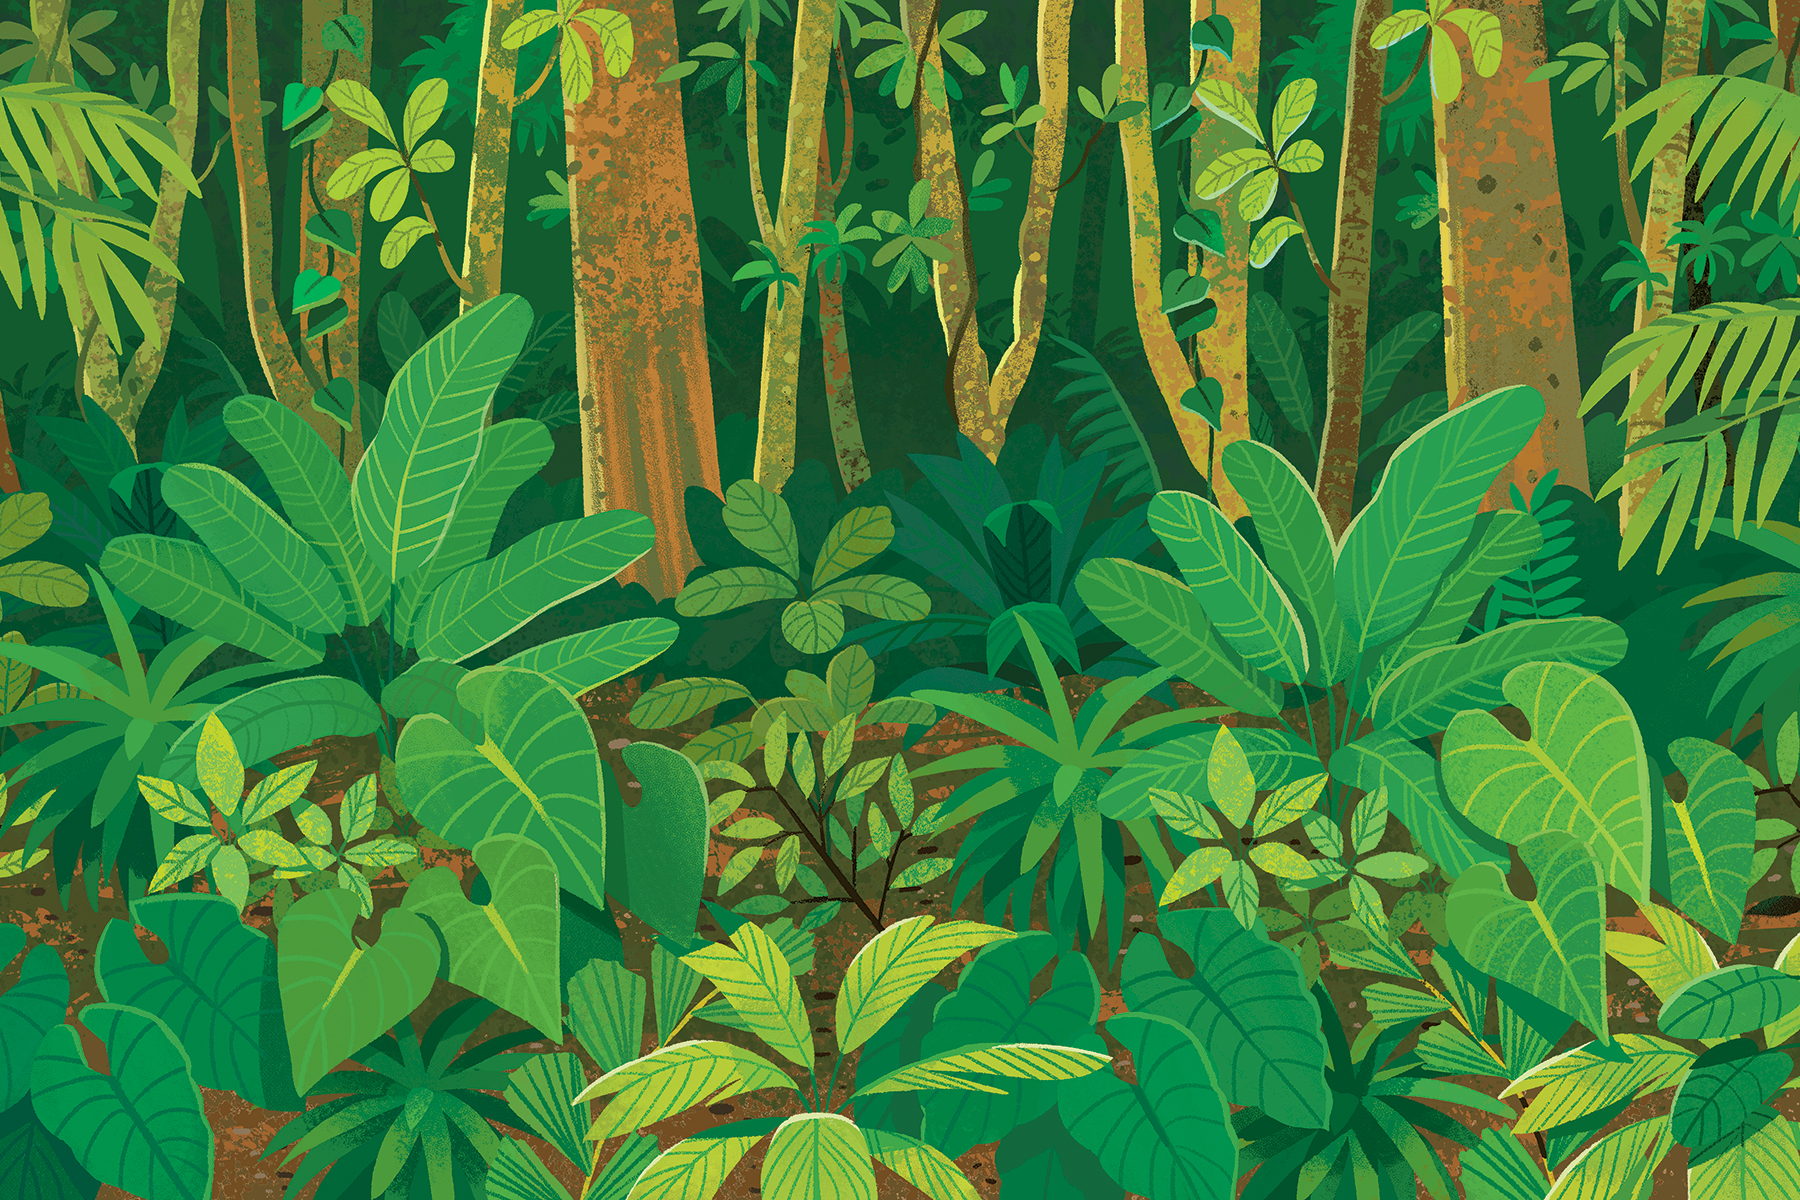 An illustration by Kim Smith from The Green Planet. It shows a jungle of plants